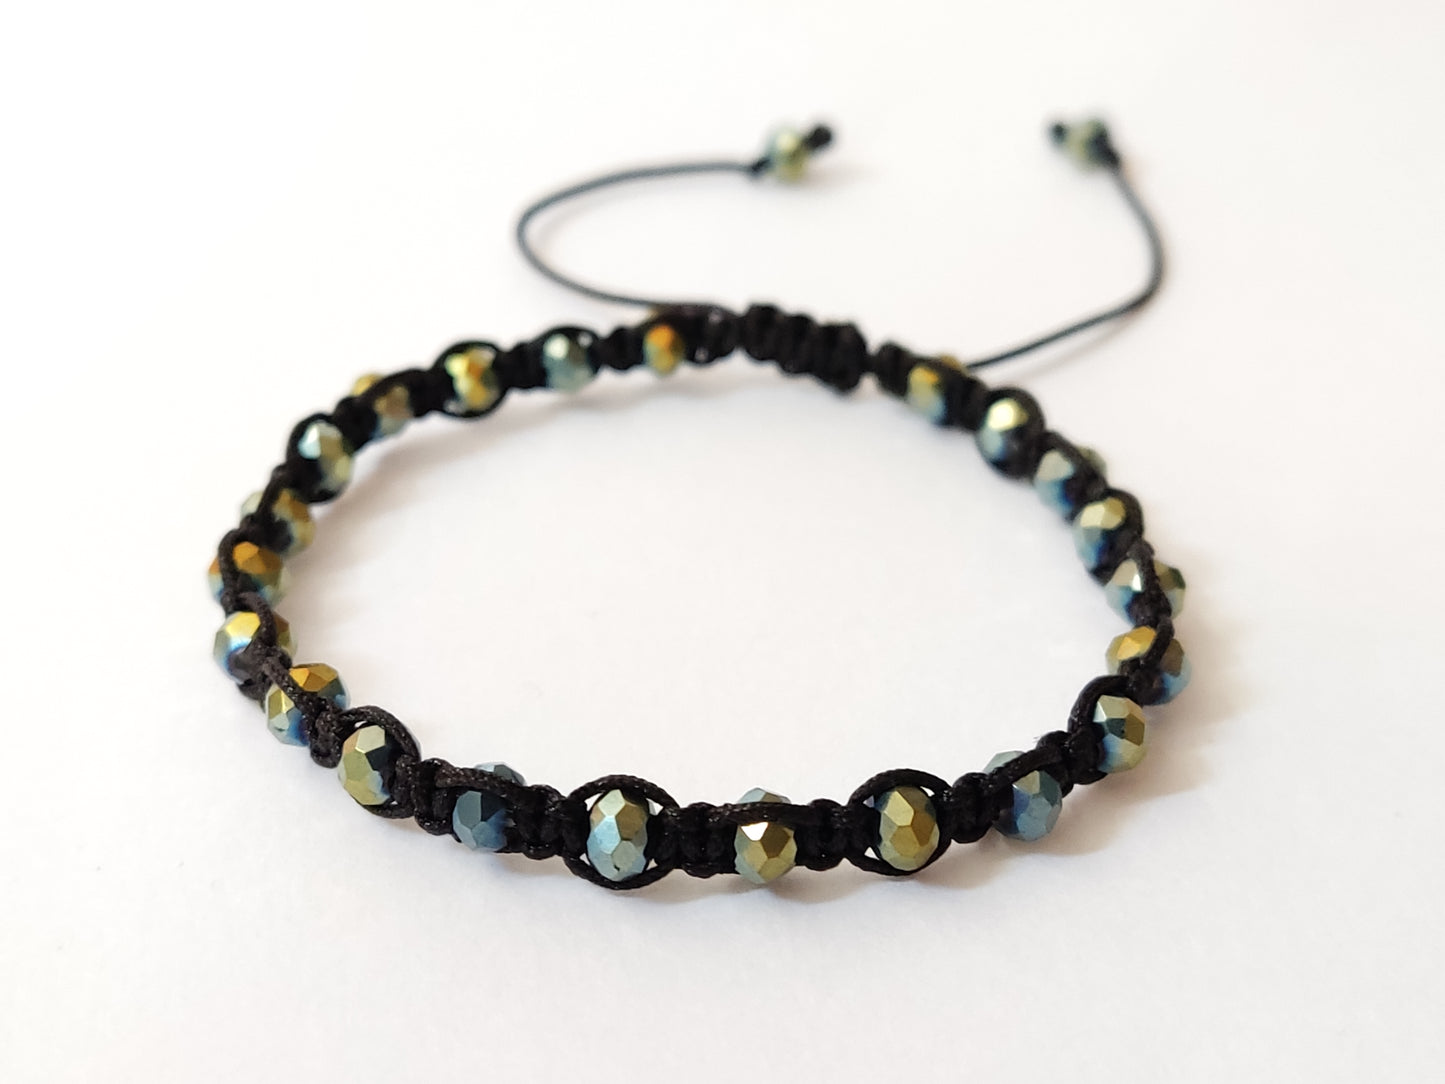 Crystal Macrame Adjustable Bracelet With Two Color Green-Silver Beads 4mm